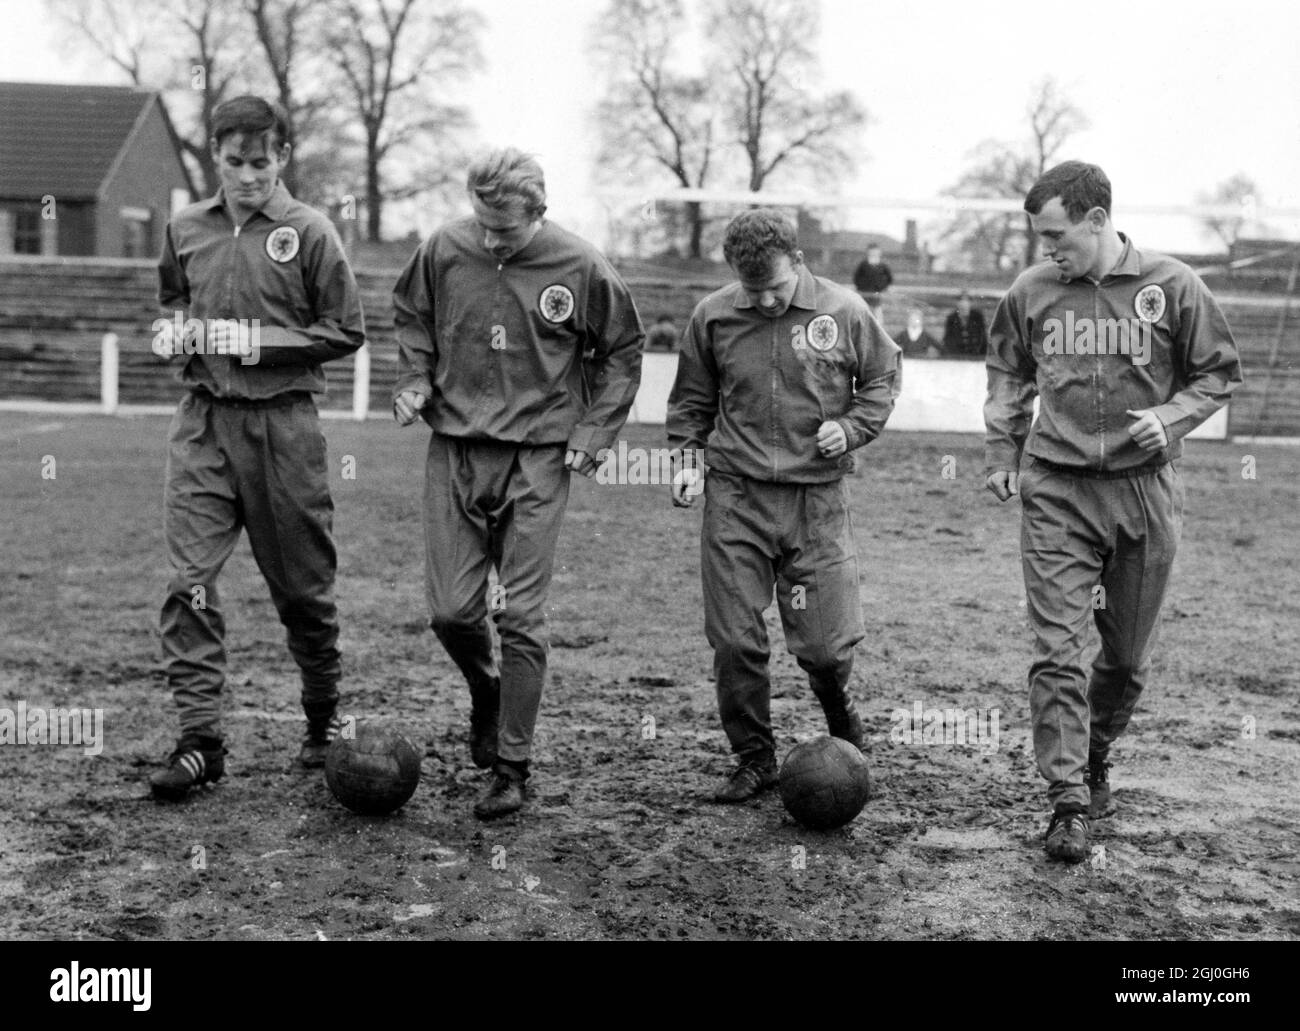 Scotland team members - The four (from left) Jim McCalliog of Sheffield United, Denis Law of Manchester United, Billy Bremner of Leeds United and Celtic winger, Bobby Lennox, will face the tight English defence at Wembley Stadium. Here they are training at Hendon football club's ground in London. 20 yr-old McCalliog wins his first full Scottish cap. 13th April 1967 Stock Photo